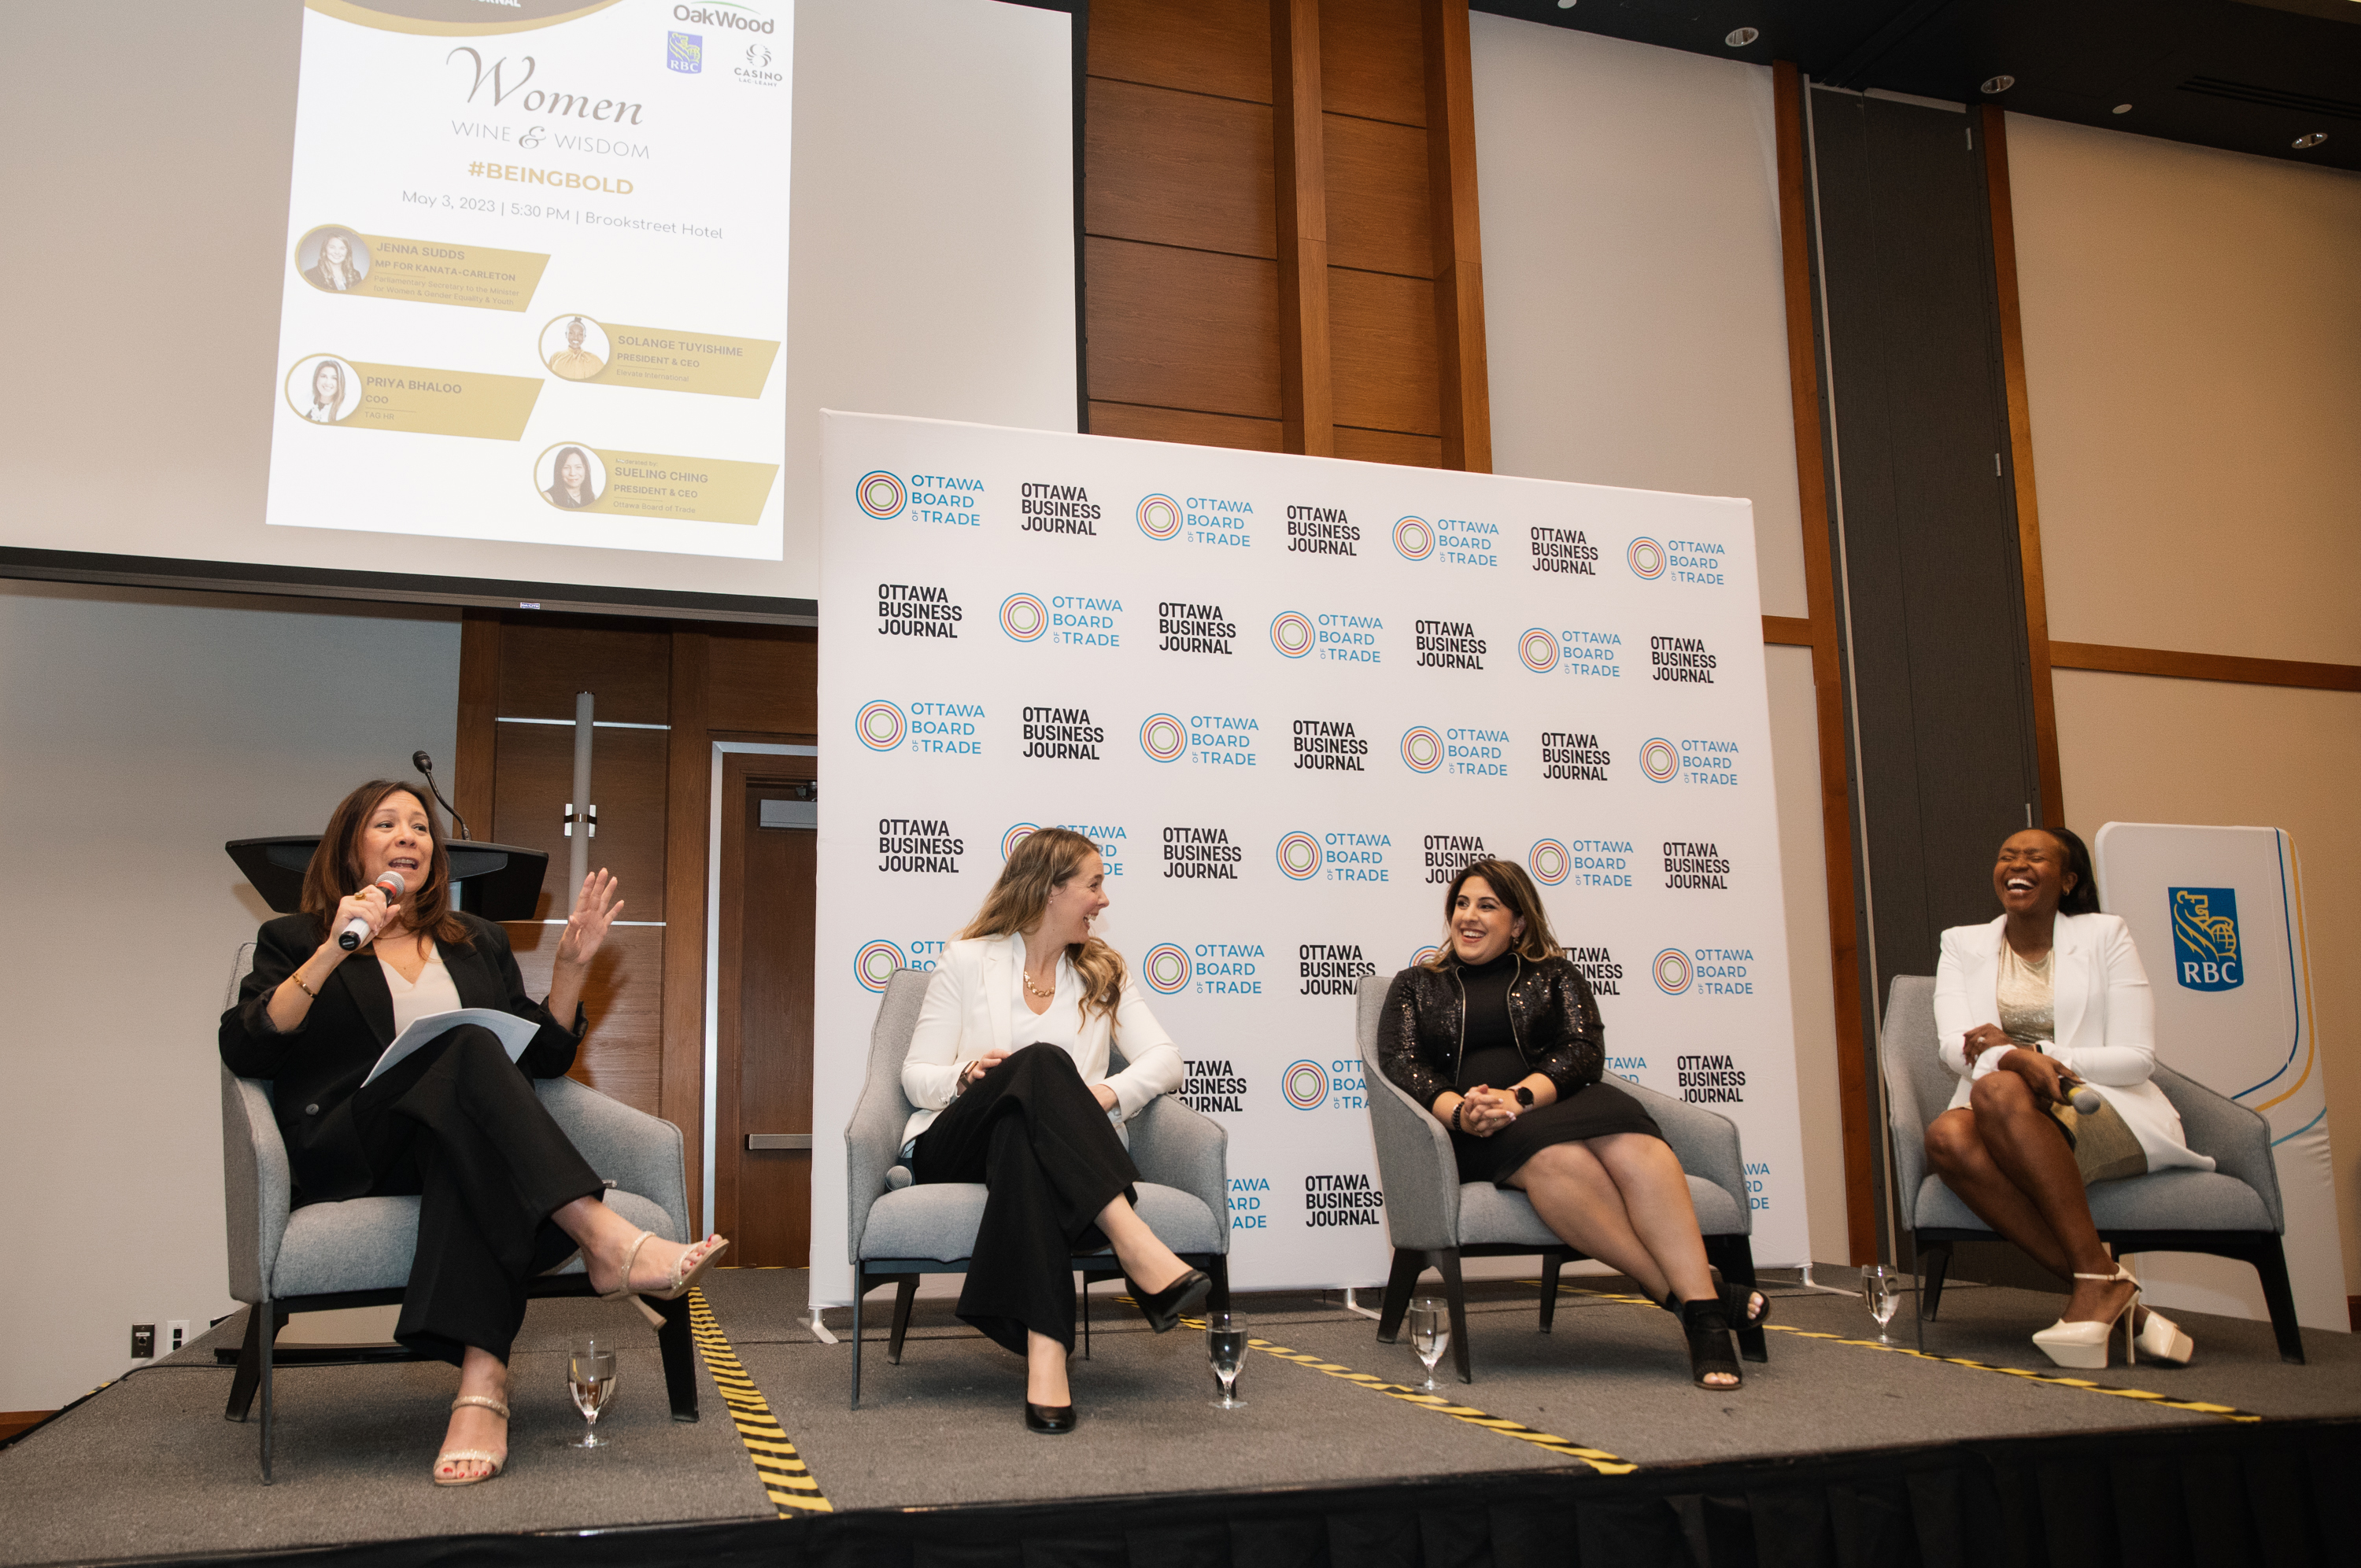 From left to right: Sueling Ching, Jenna Sudds, Priya Bhaloo, and Solange Tuyishime speaking at Women, Wine and Wisdom: Being Bold